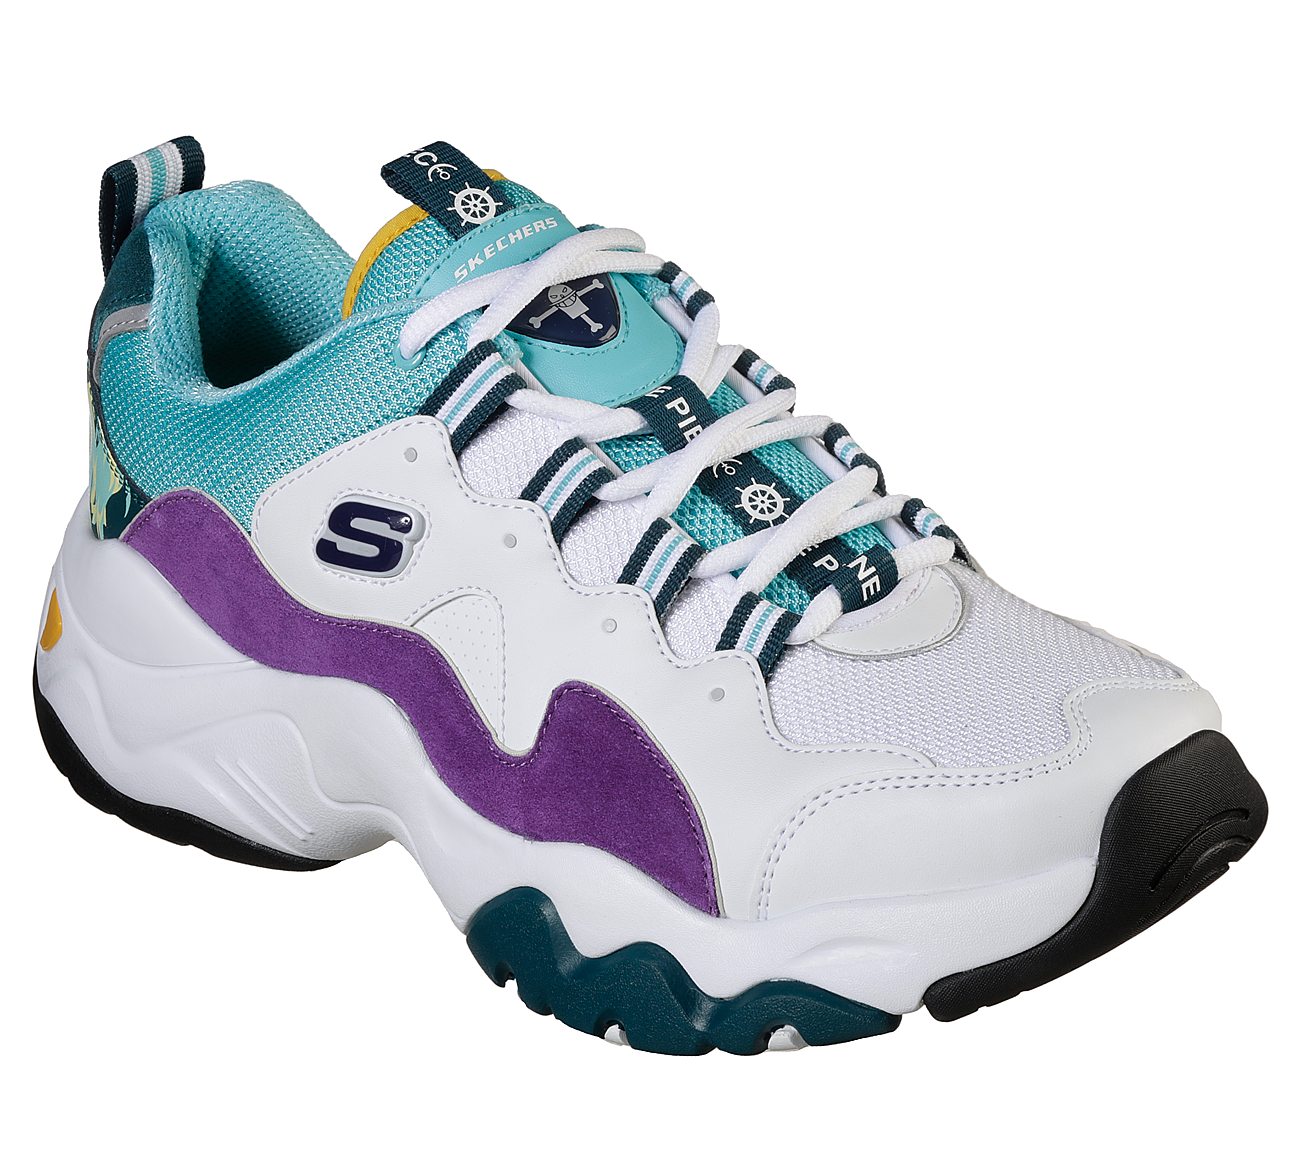 télex Conejo Alaska Skechers collabs with One Piece for new D'Lites 3.0 collection